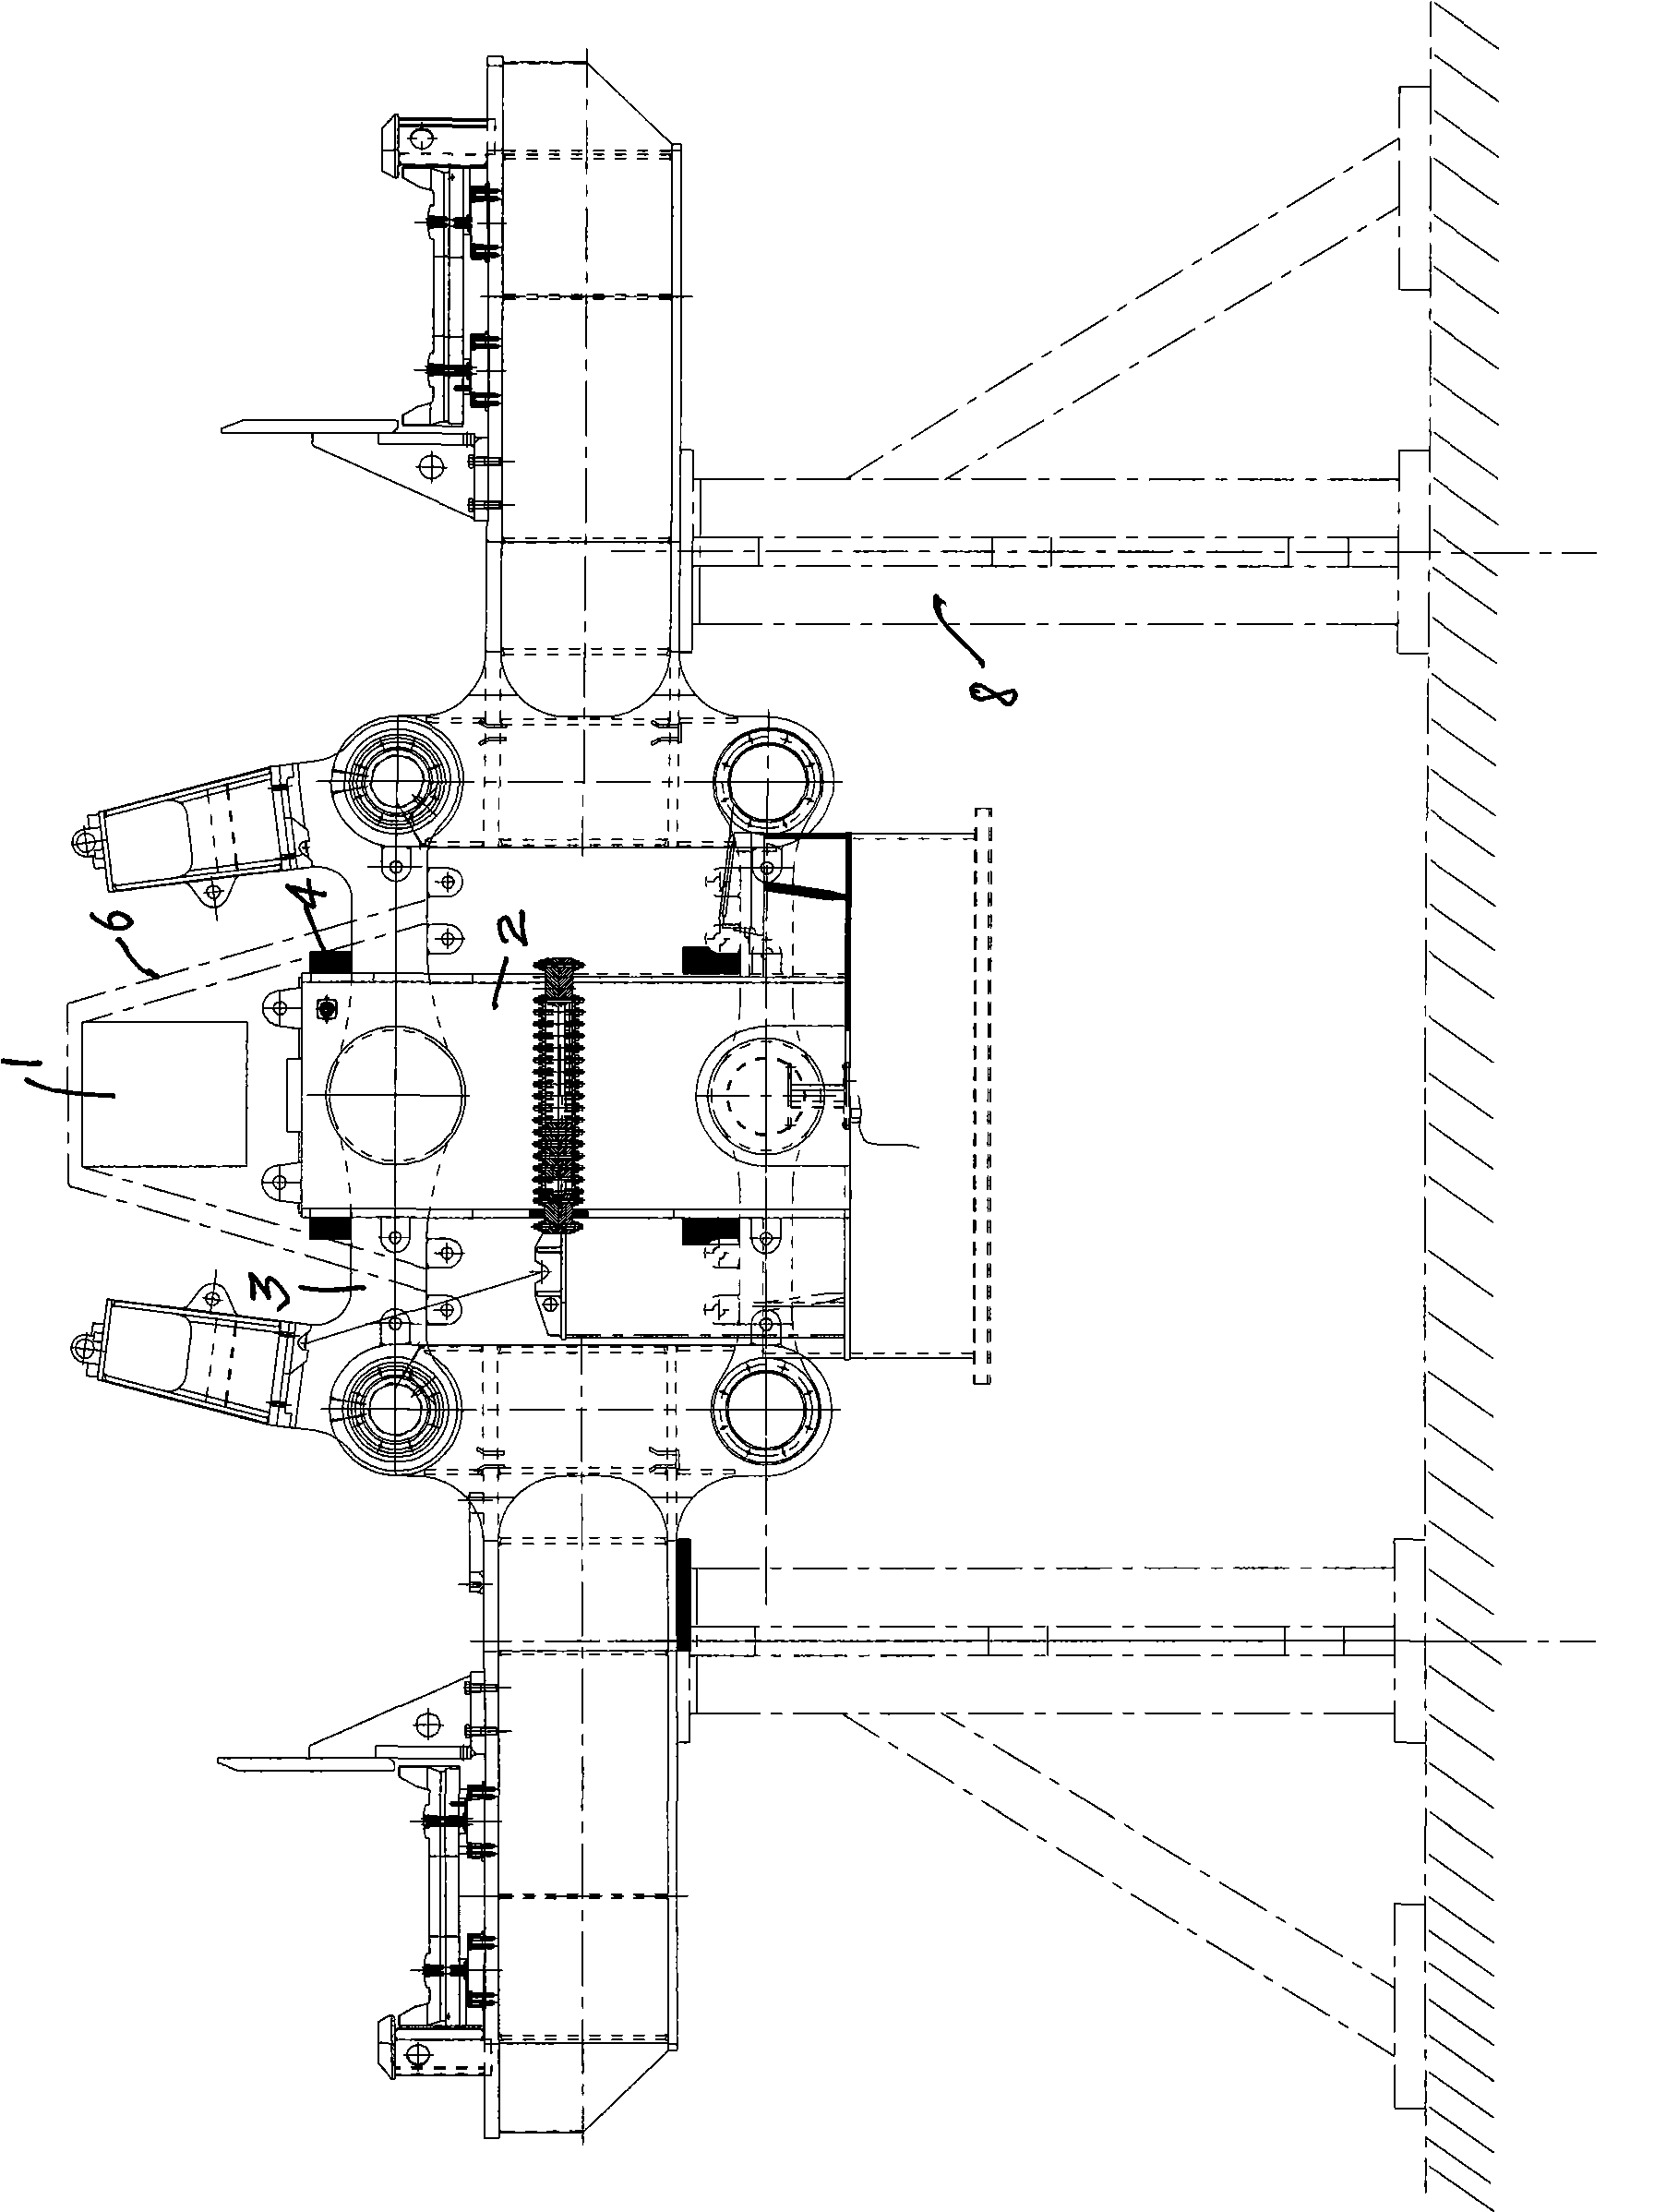 Integral replacing method of ladle turret with limited upper lifting space